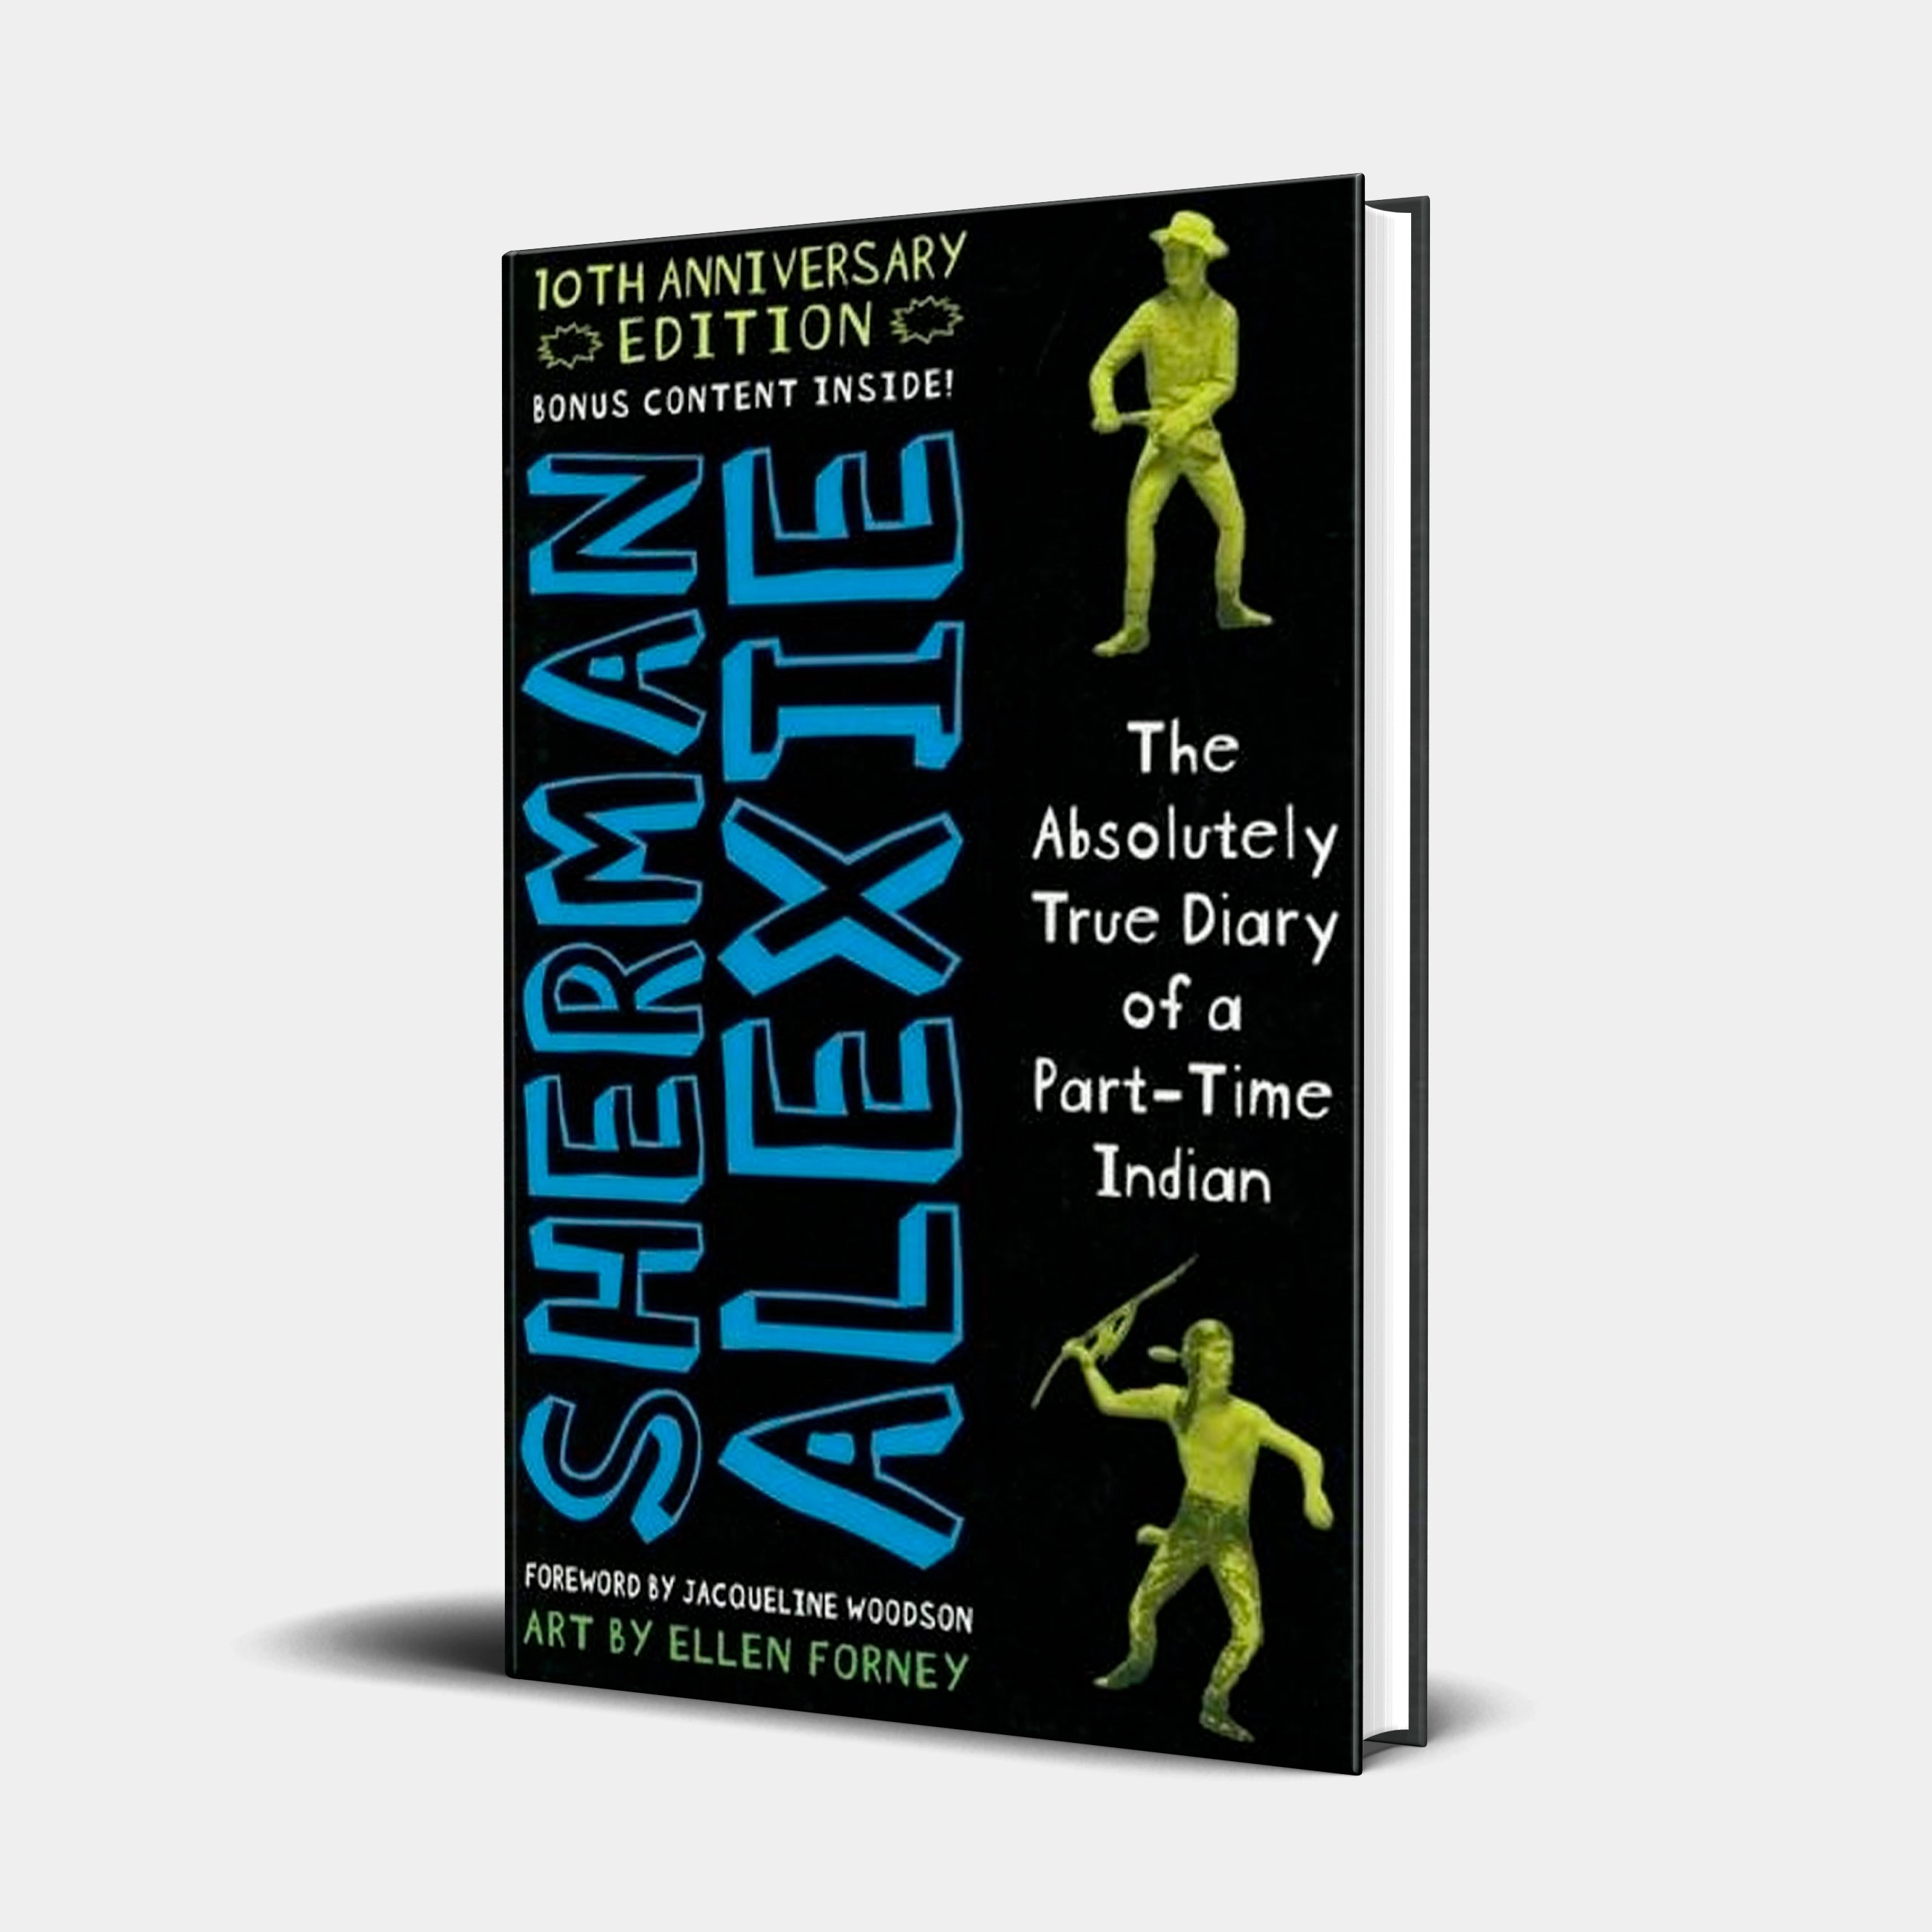 Absolute true. The absolutely true Diary of a Part-time indian Sherman Alexie.